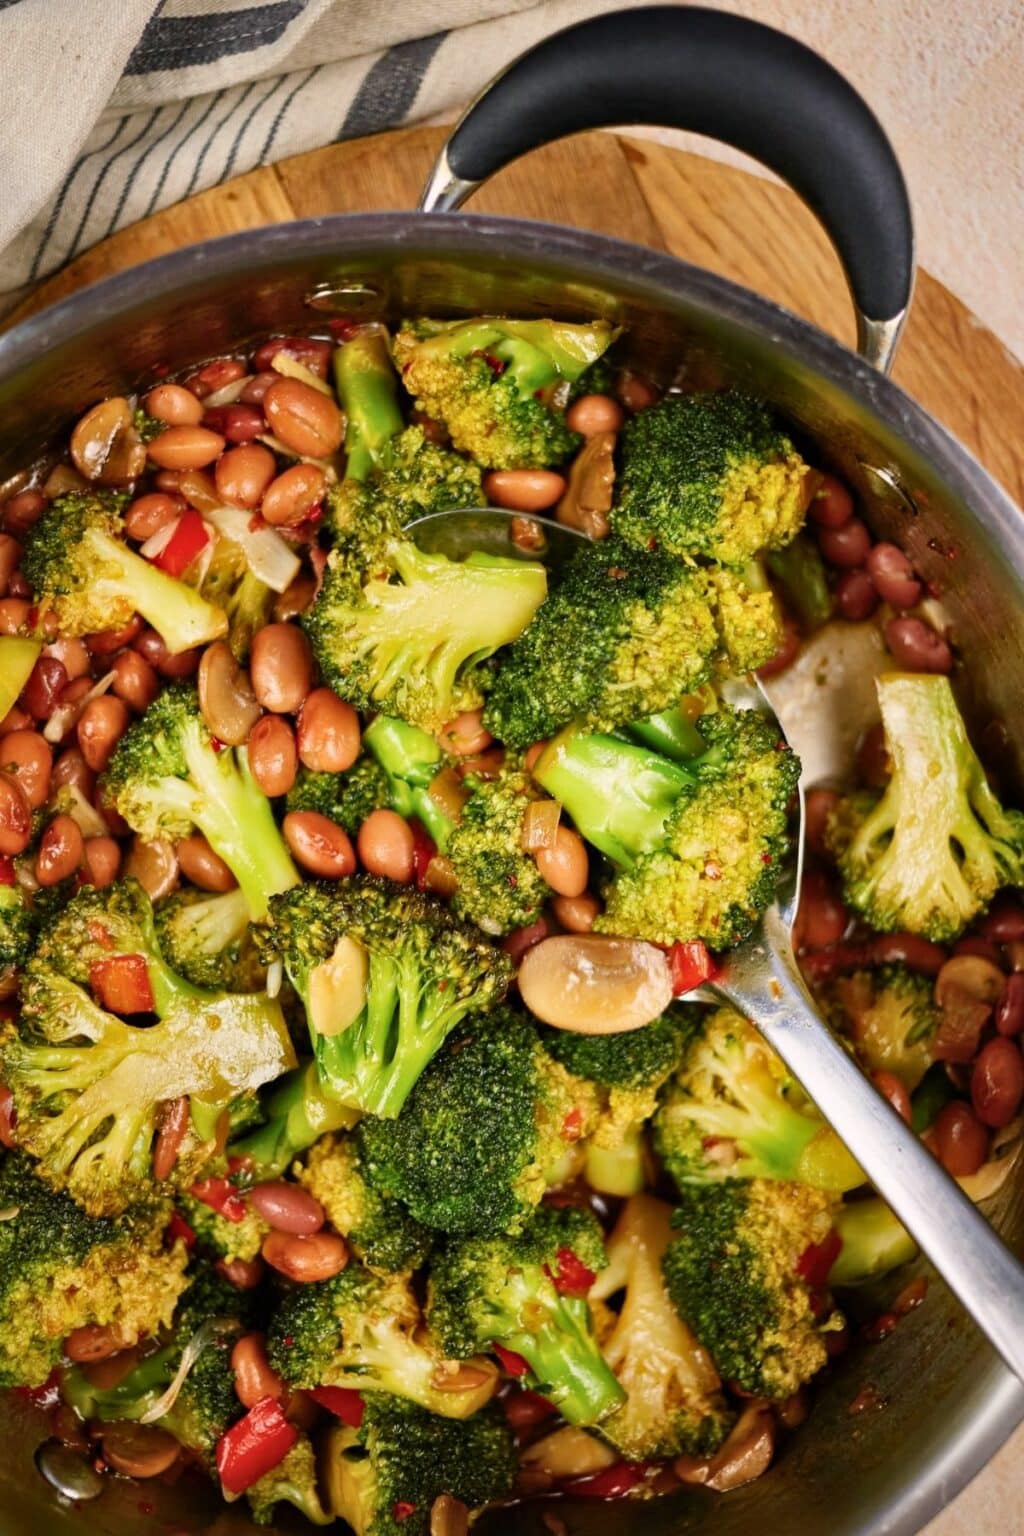 Broccoli Stir Fry With Mushrooms The Cheeky Chickpea 6739